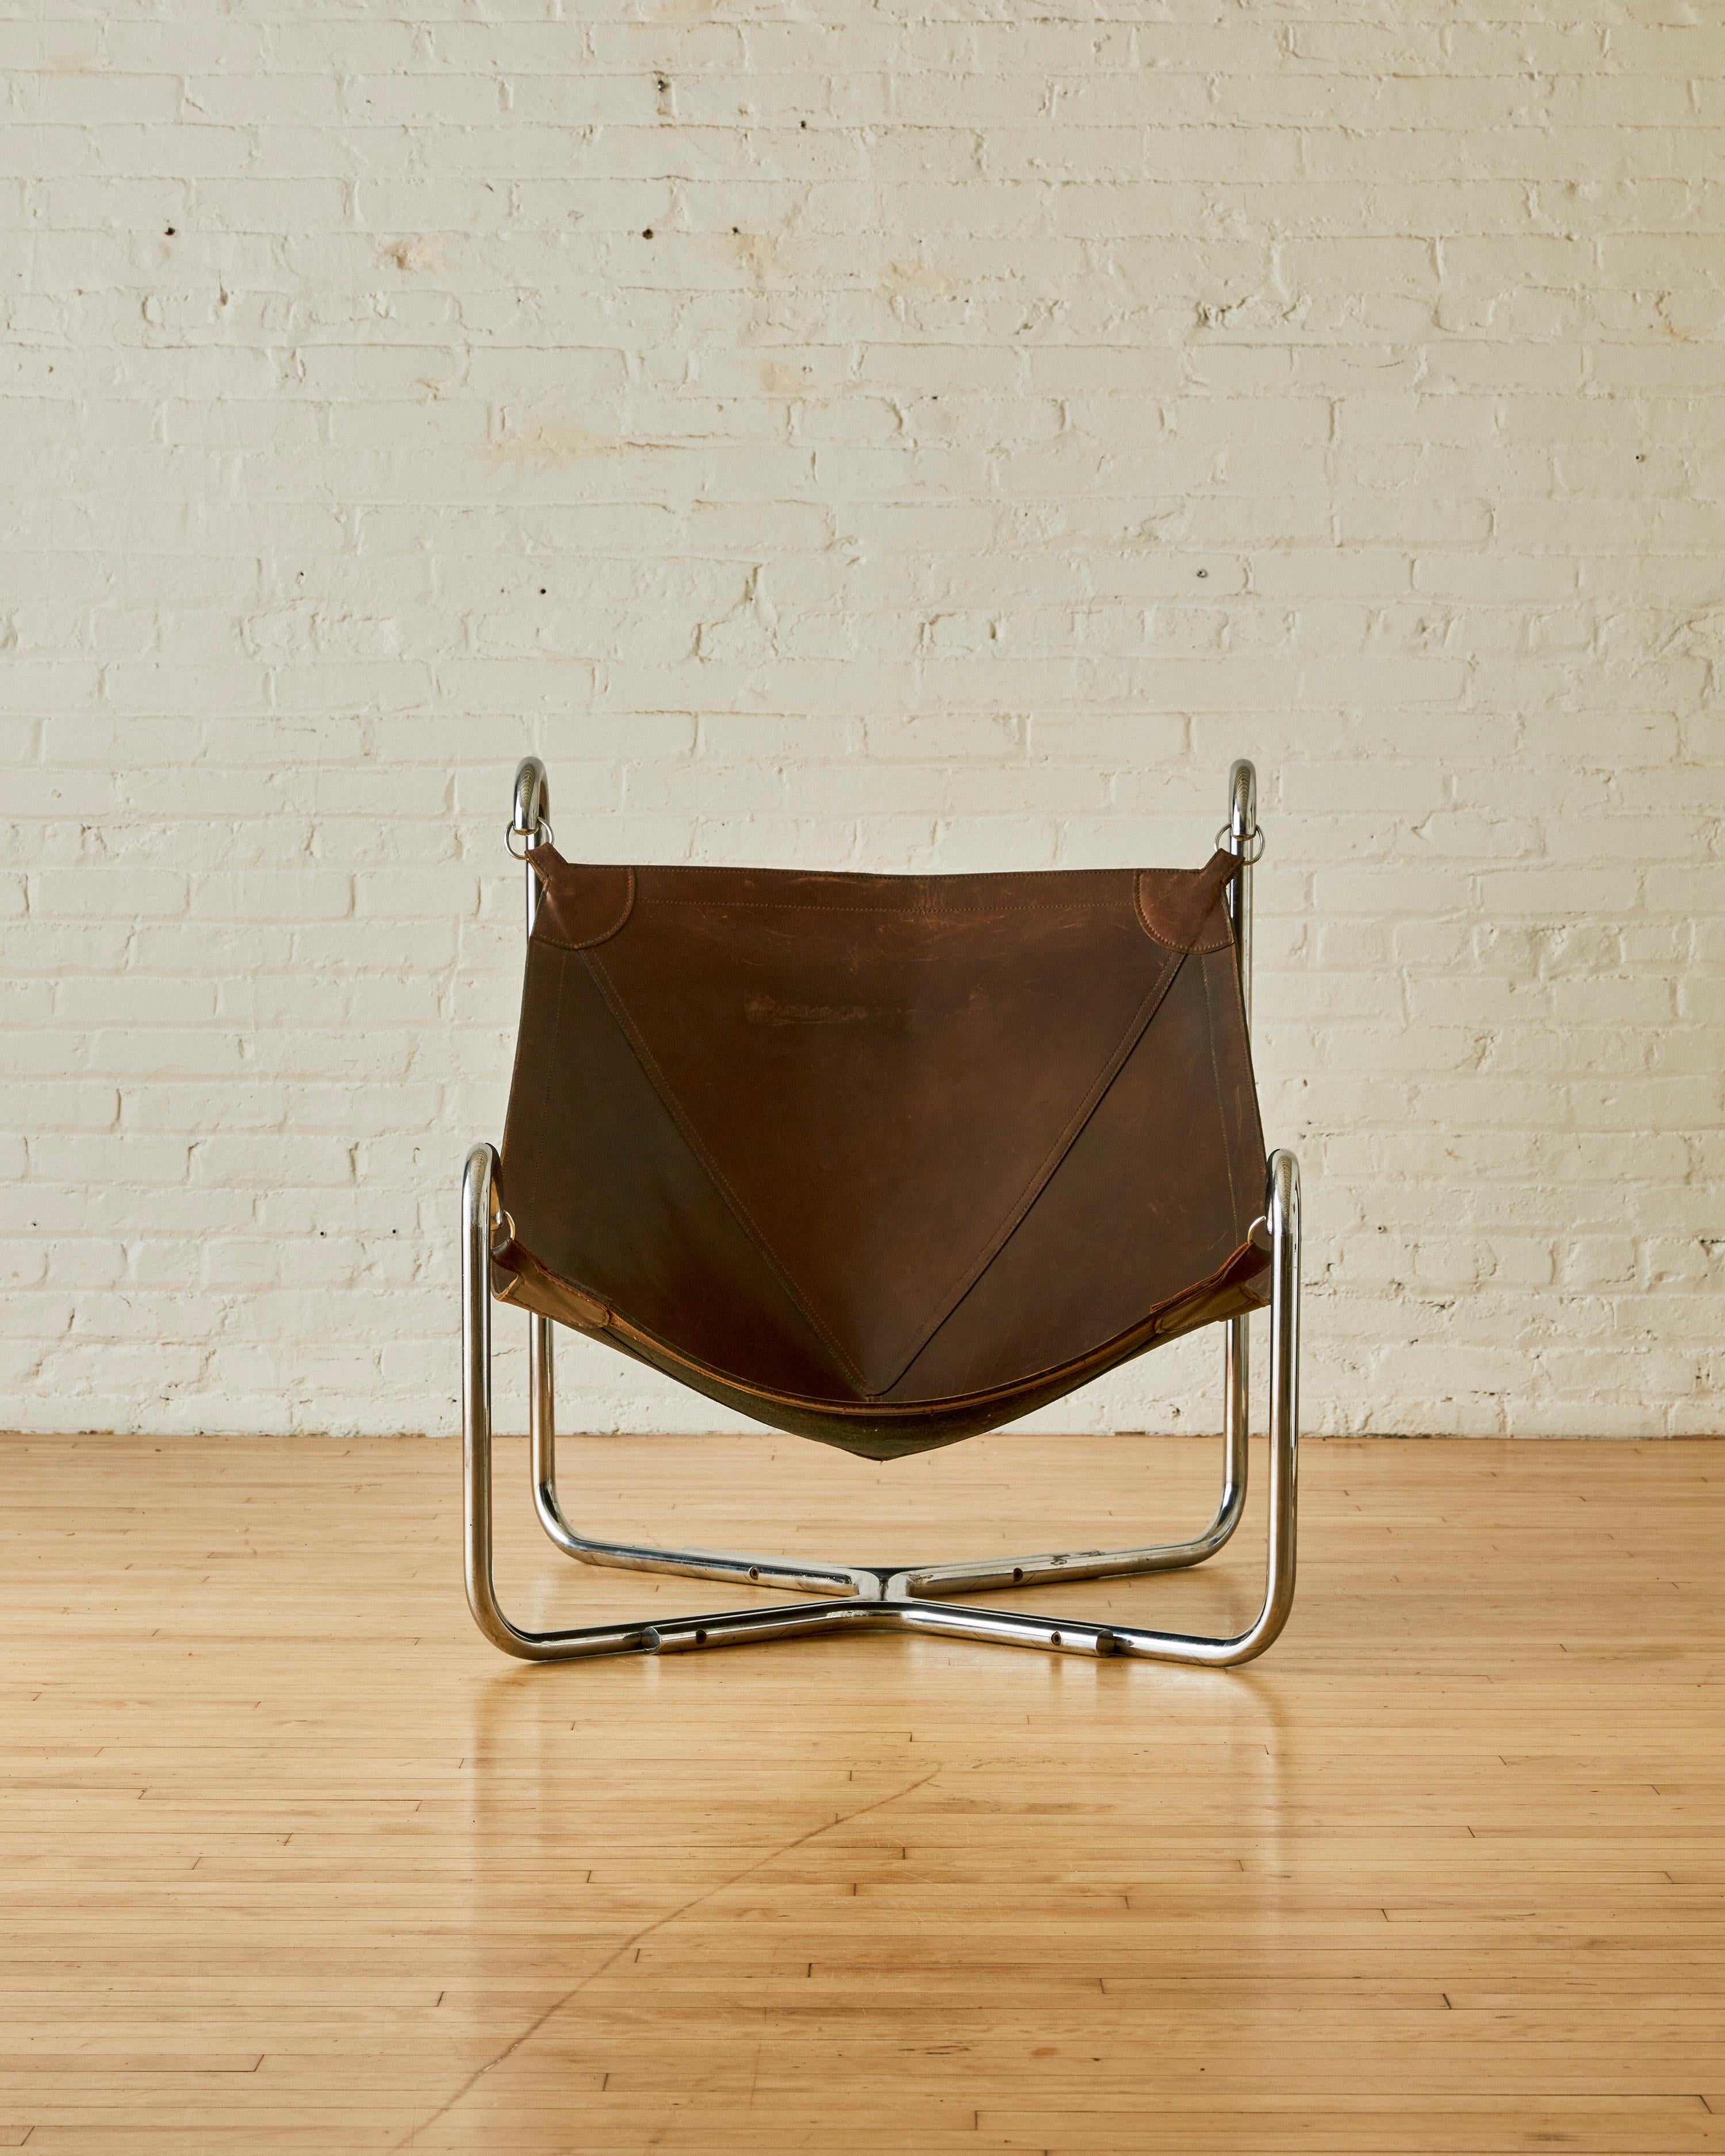 Baffo armchair by Gianni Pareschi and Ezio Didoni for Dam, by Busnelli, features a tubular chromed metal frame. The seat is suspended within the frame and secured by a metal ring connecting the frame to a brown leather seat.

